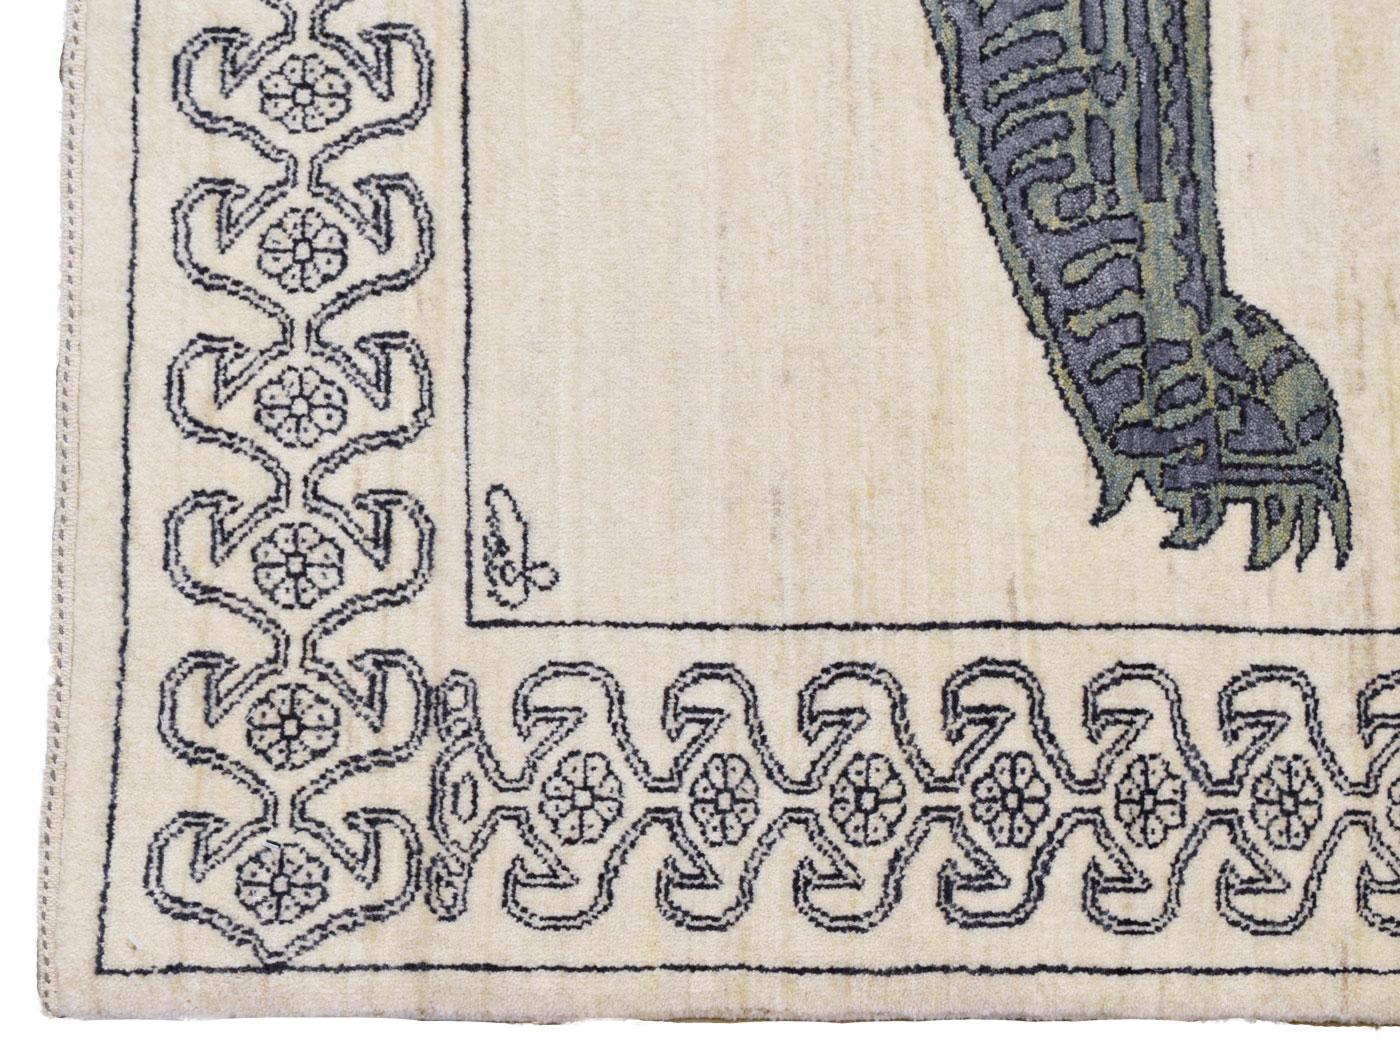 With a large distinct green and gray lion motif, this hand-knotted wool carpet, 